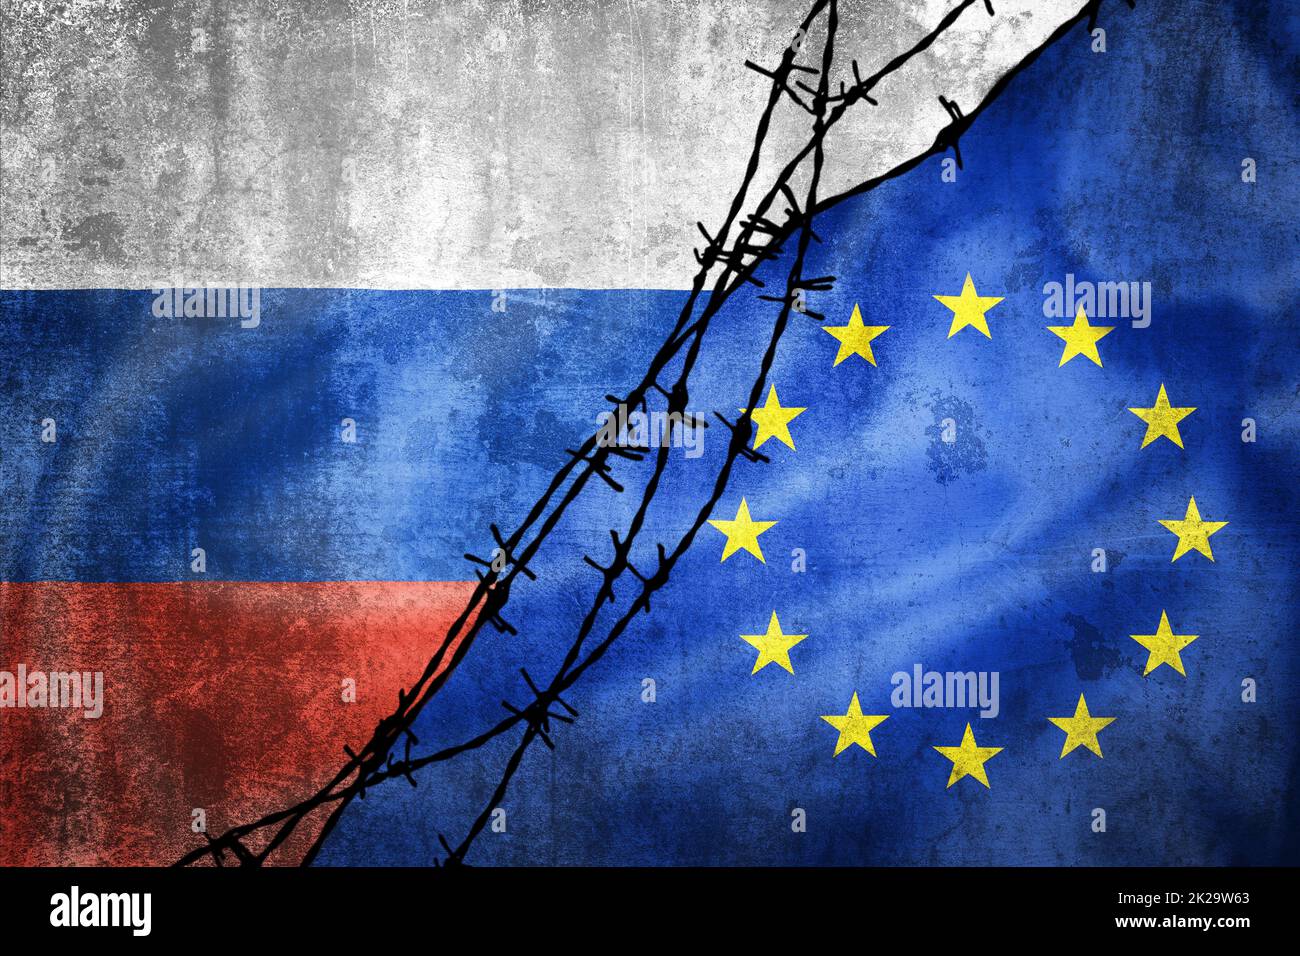 Grunge flags of Russia and European Union and Poland divided by barb wire illustration Stock Photo